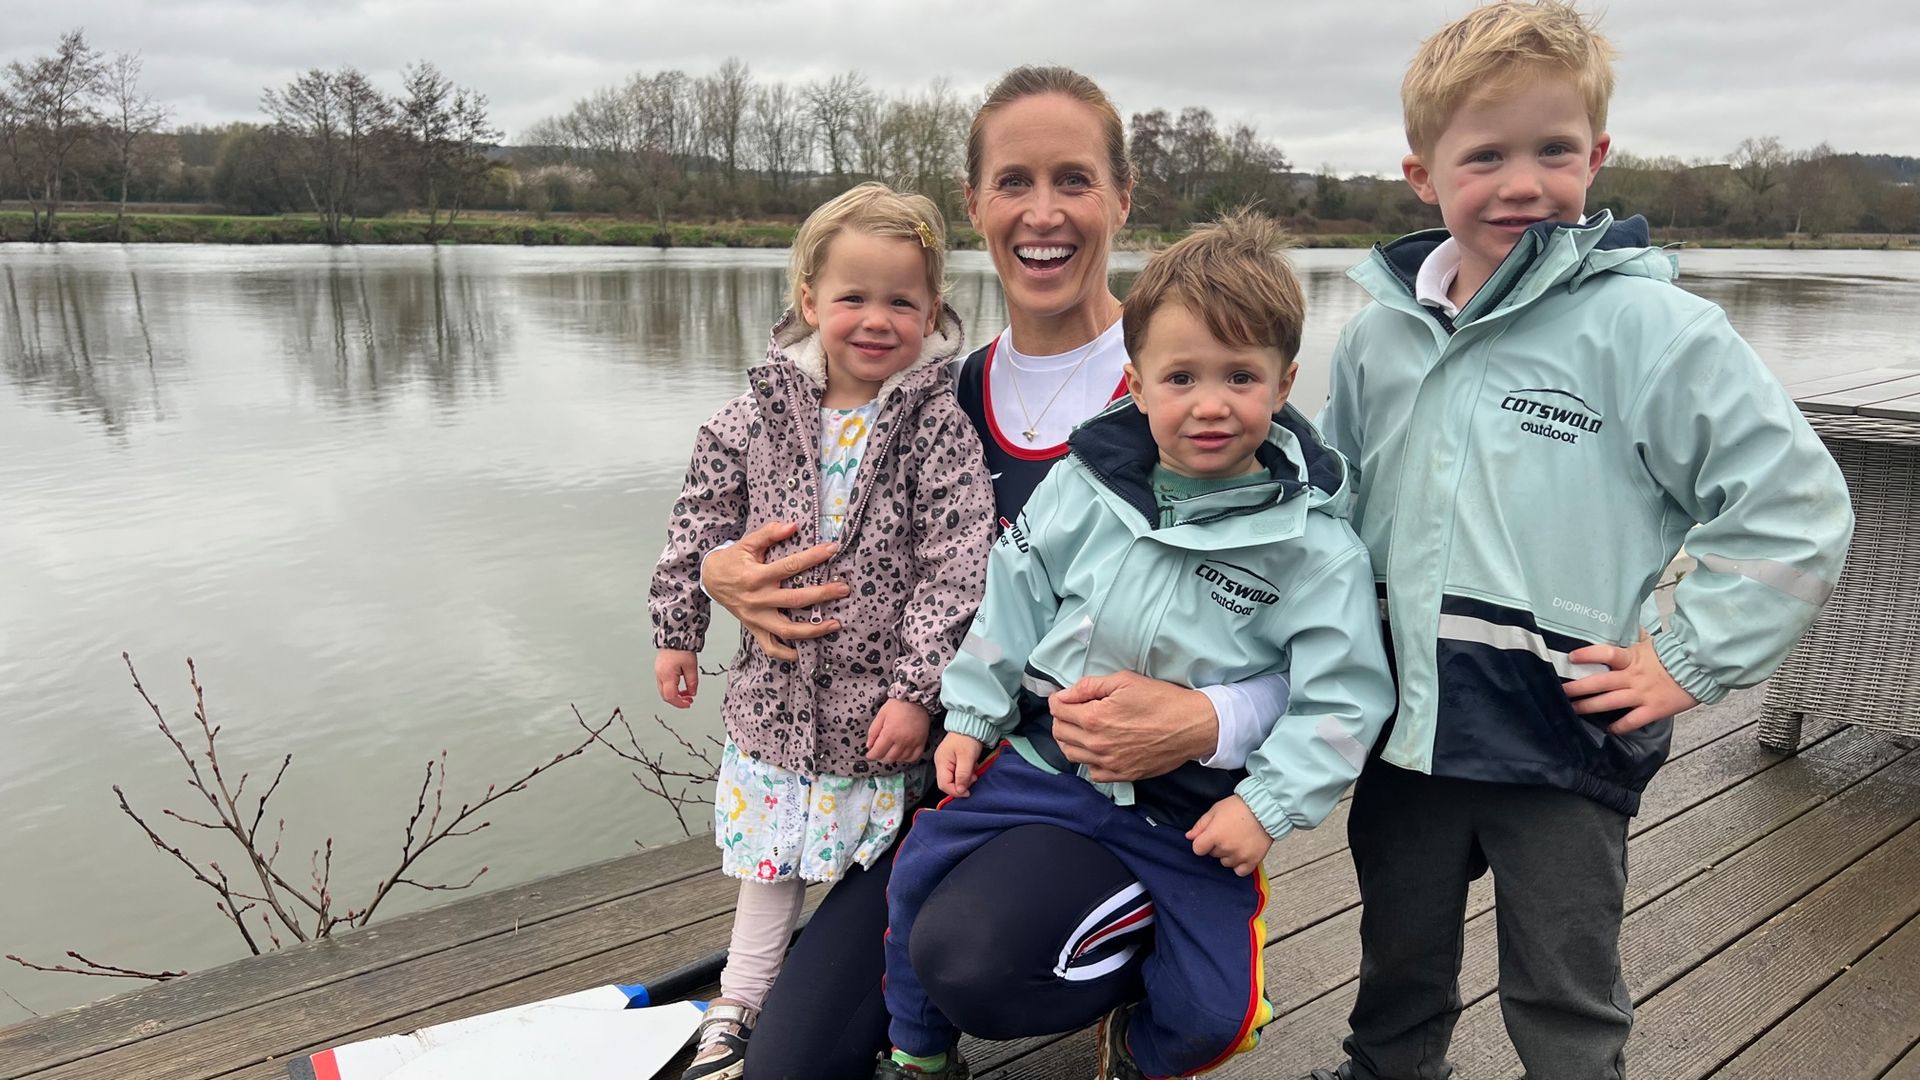 Helen Glover makes exciting announcement and reveals husband Steve Backshall's reaction - exclusive